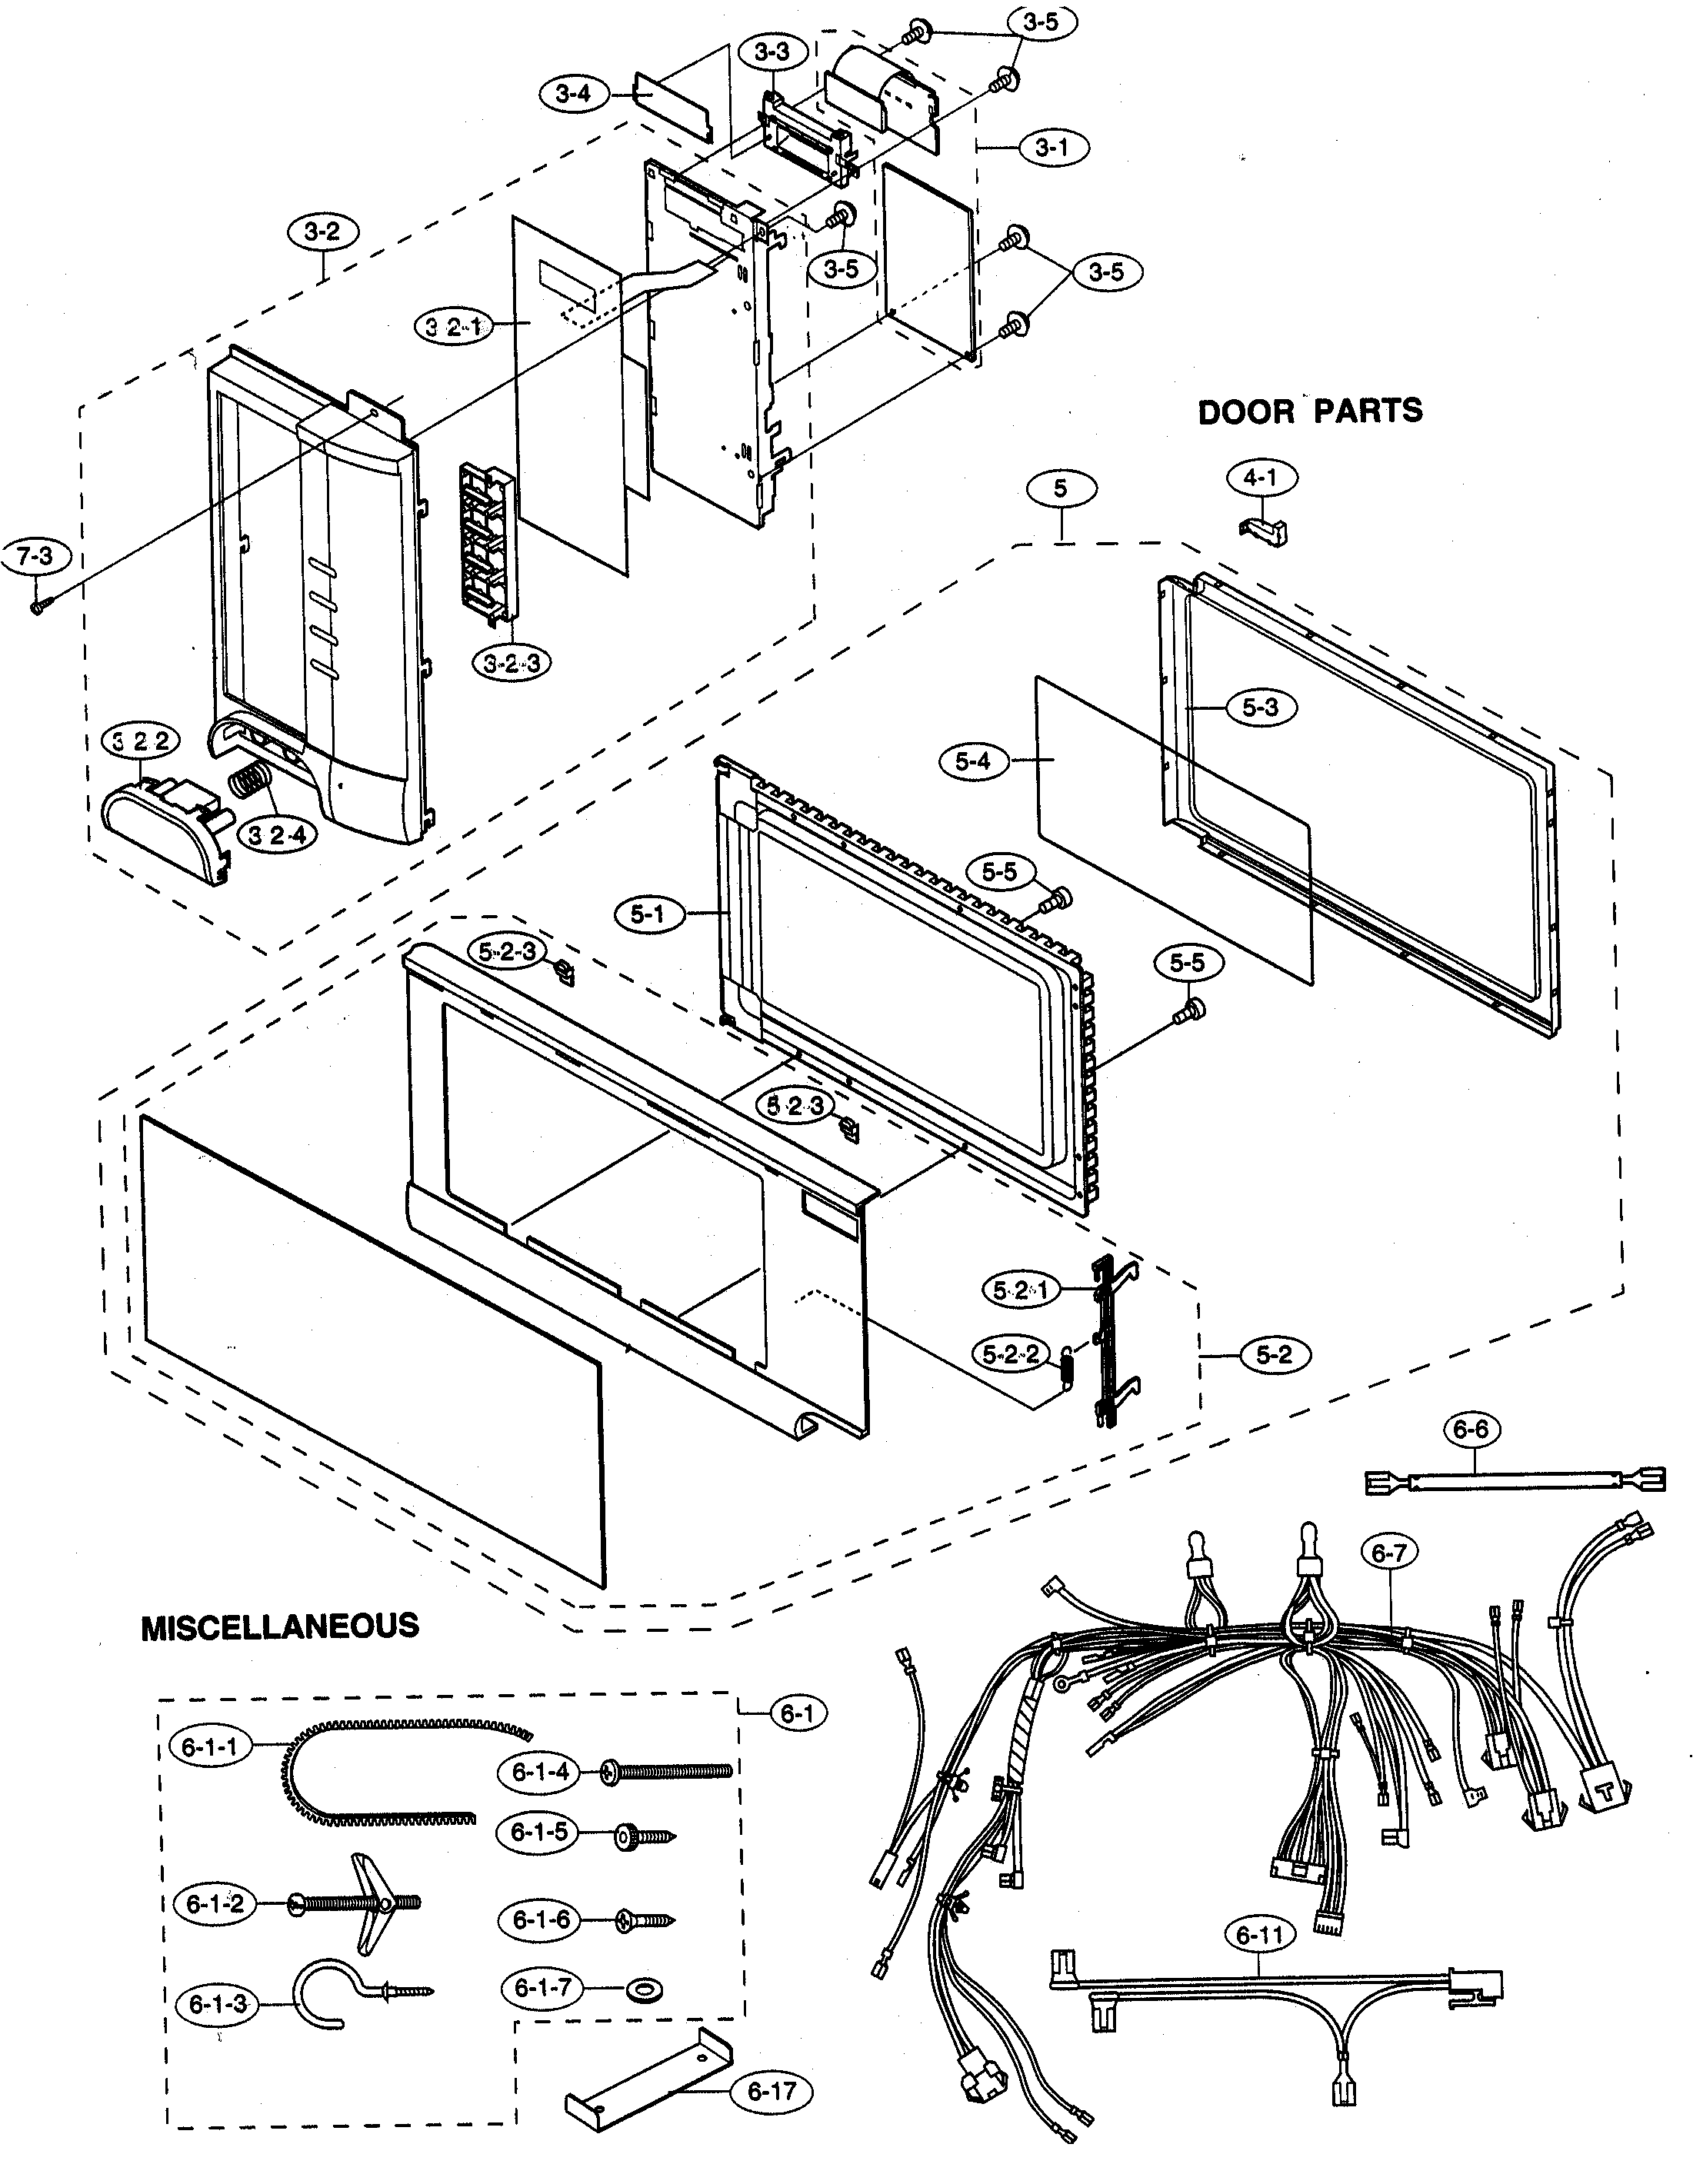 Sharp Carousel Microwave Parts Diagram - Wiring Site Resource